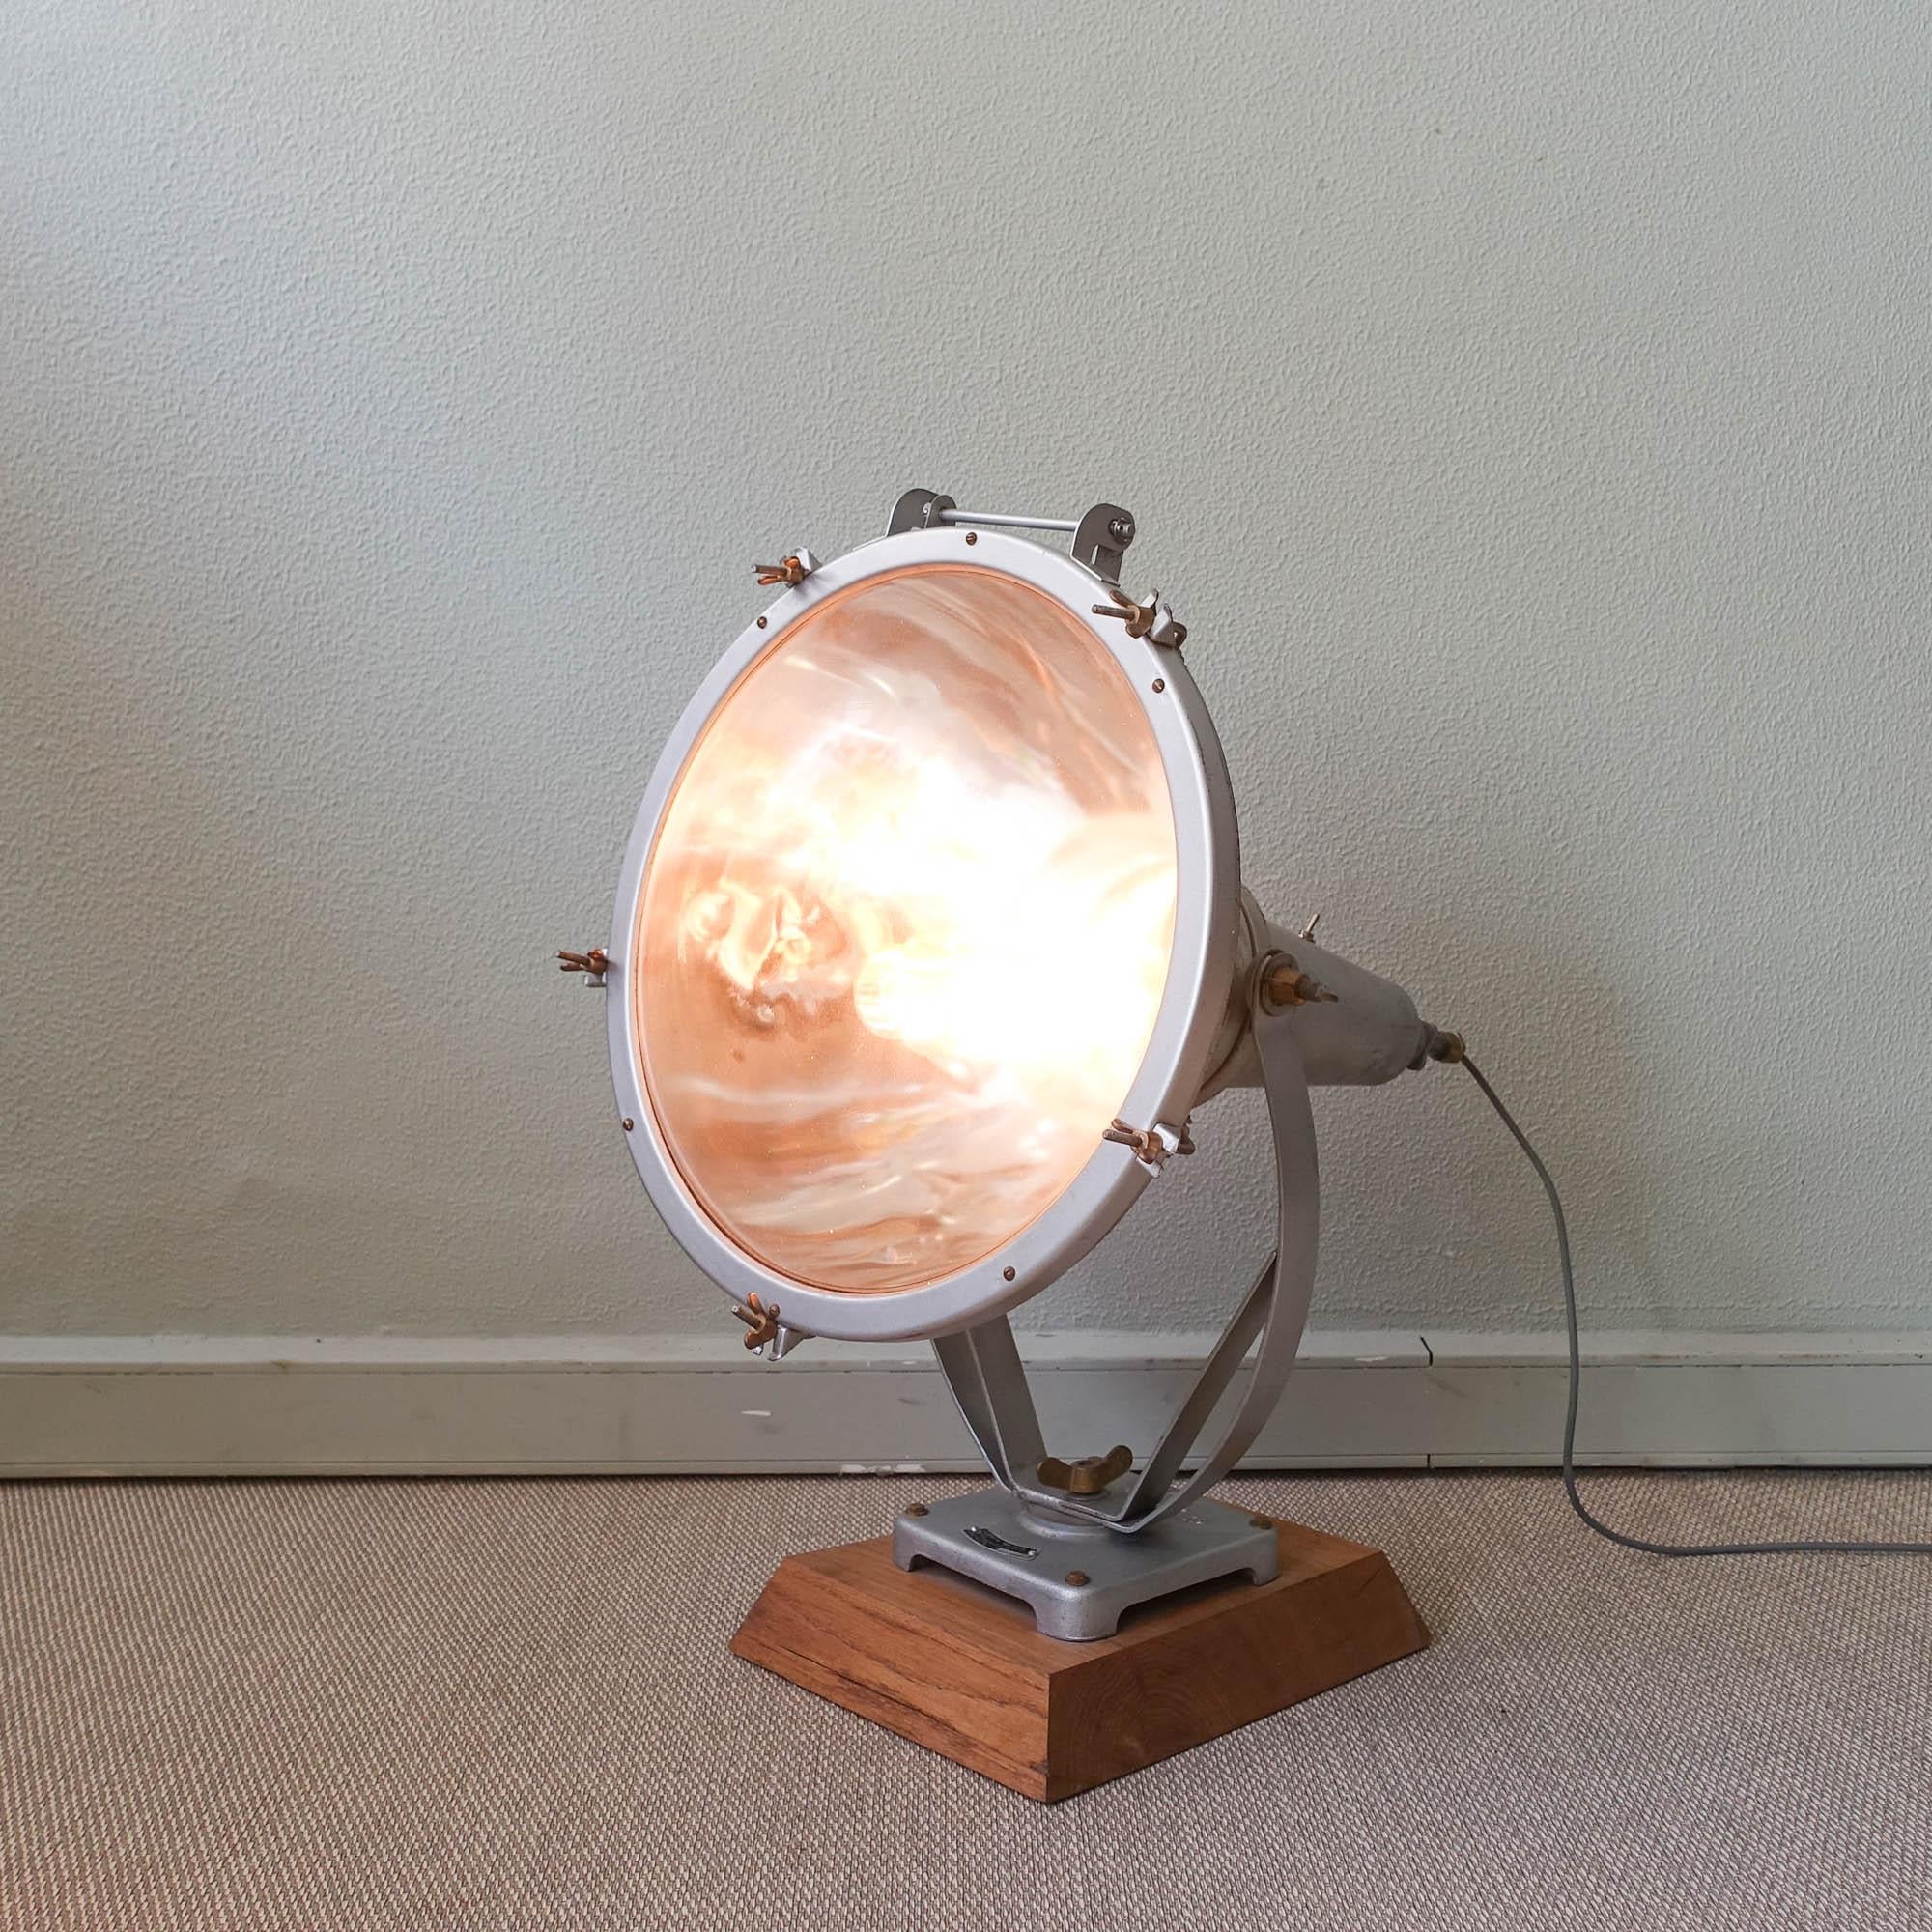 This exterior focus lamp was designed and manufactured by Mazda Paris, in France during the 1930s. It is made of metal with glass diffuser in front and metal mirror inside. It's set on a geometric wooden base. In original and good condition.